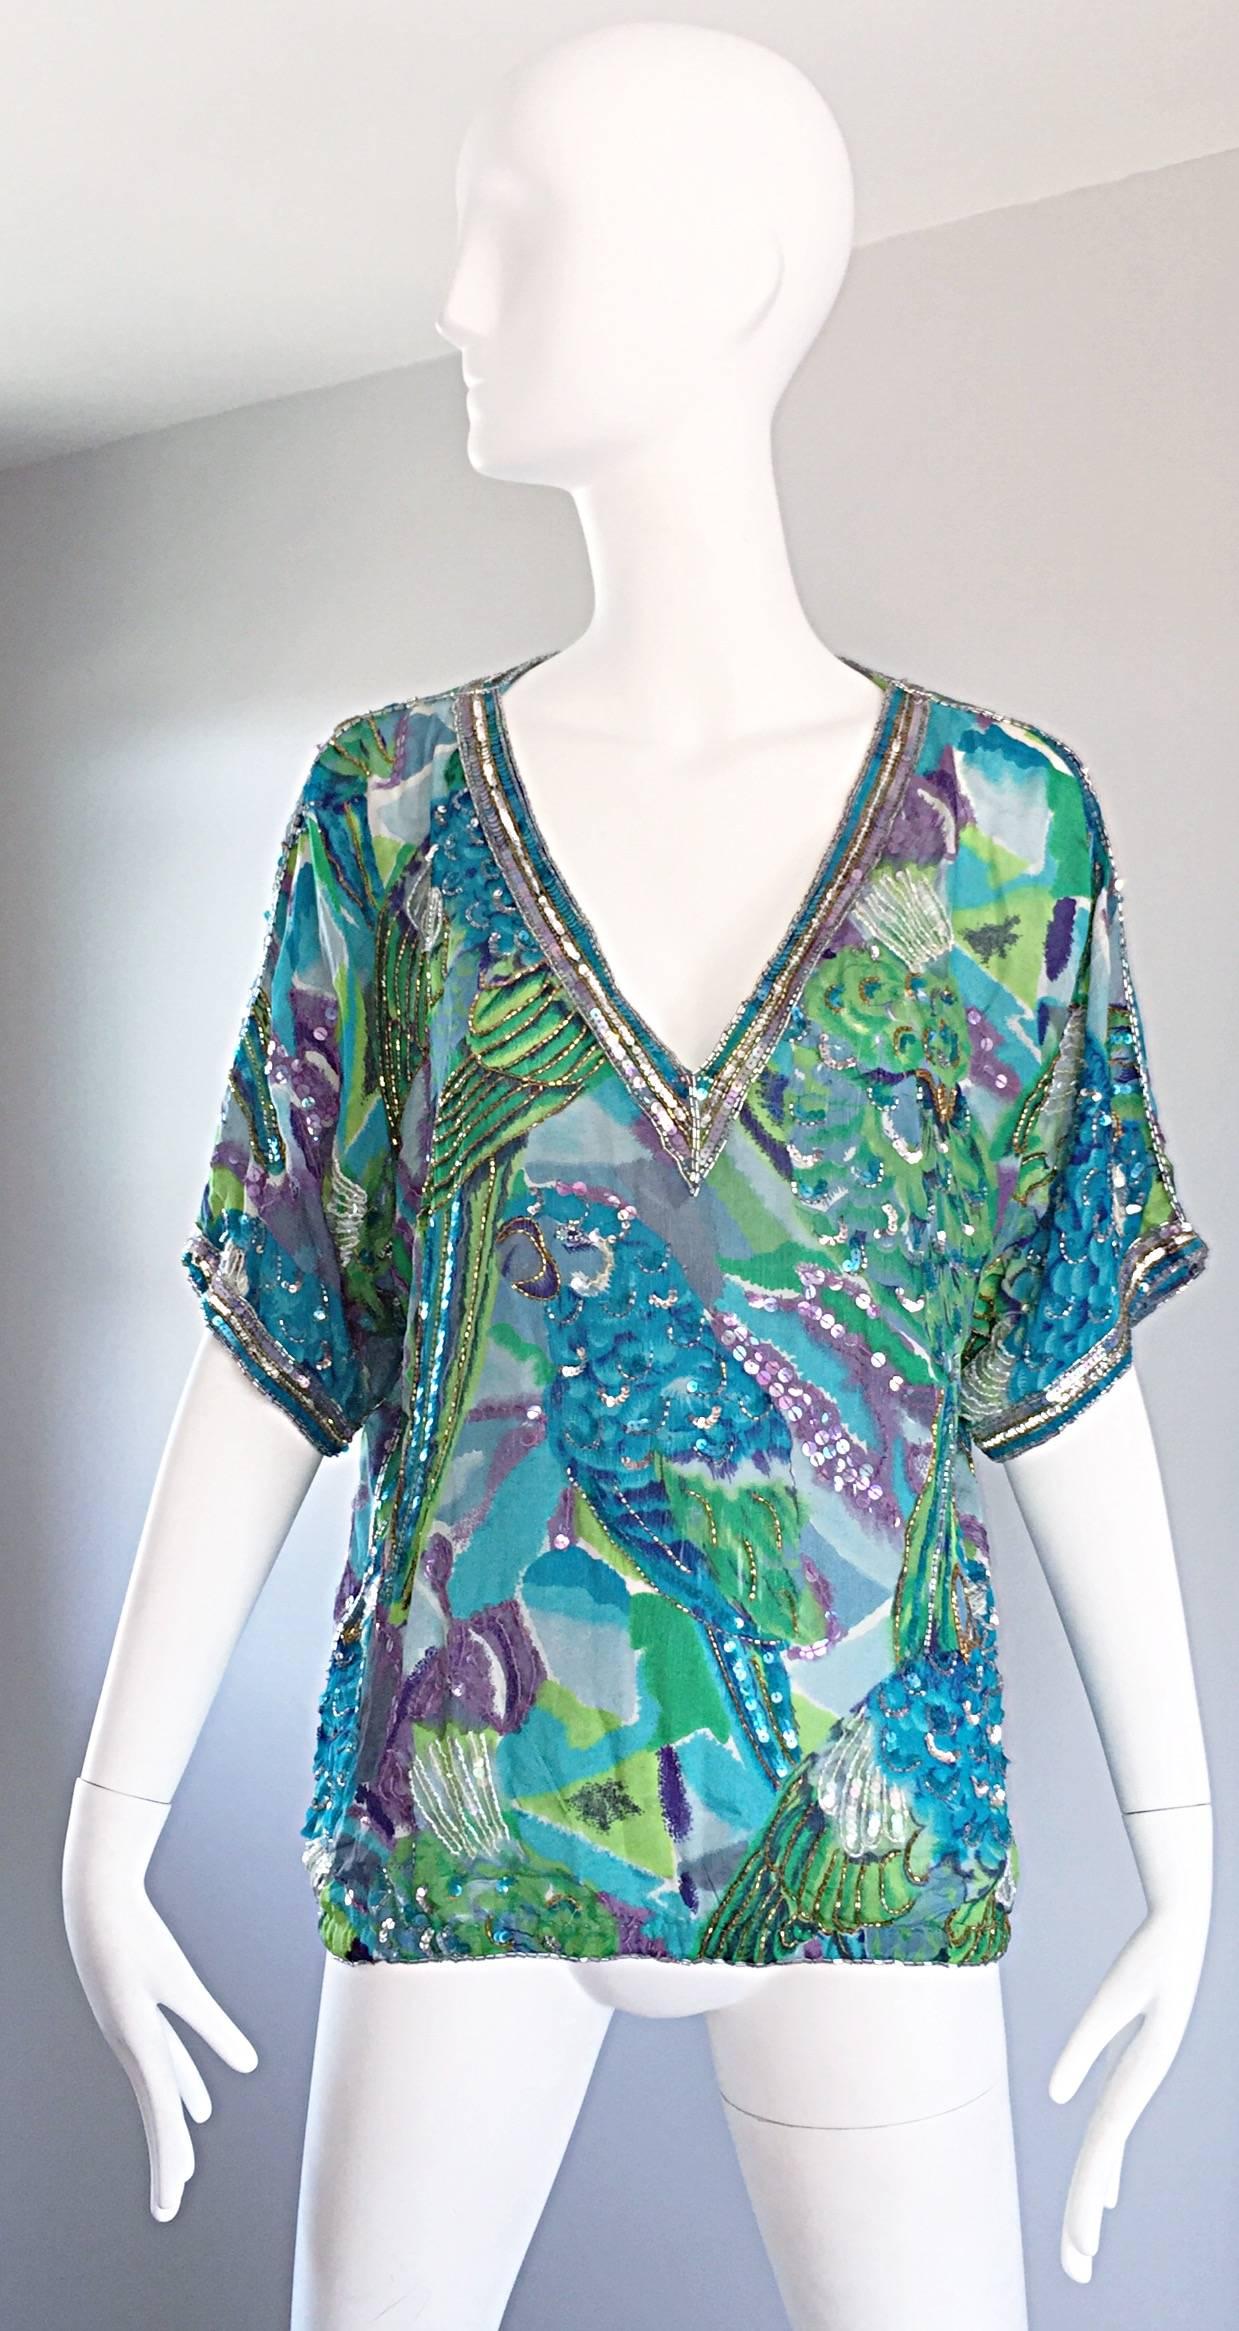 Brilliant vintage LILLIE RUBIN silk sequined and beaded 'parrots' top! Features vibrant colors of blue, purple, green and white throughout. Hand-sewn sequins add just the right amount of shine! V-neckline with hand-sewn seed beads and sequins